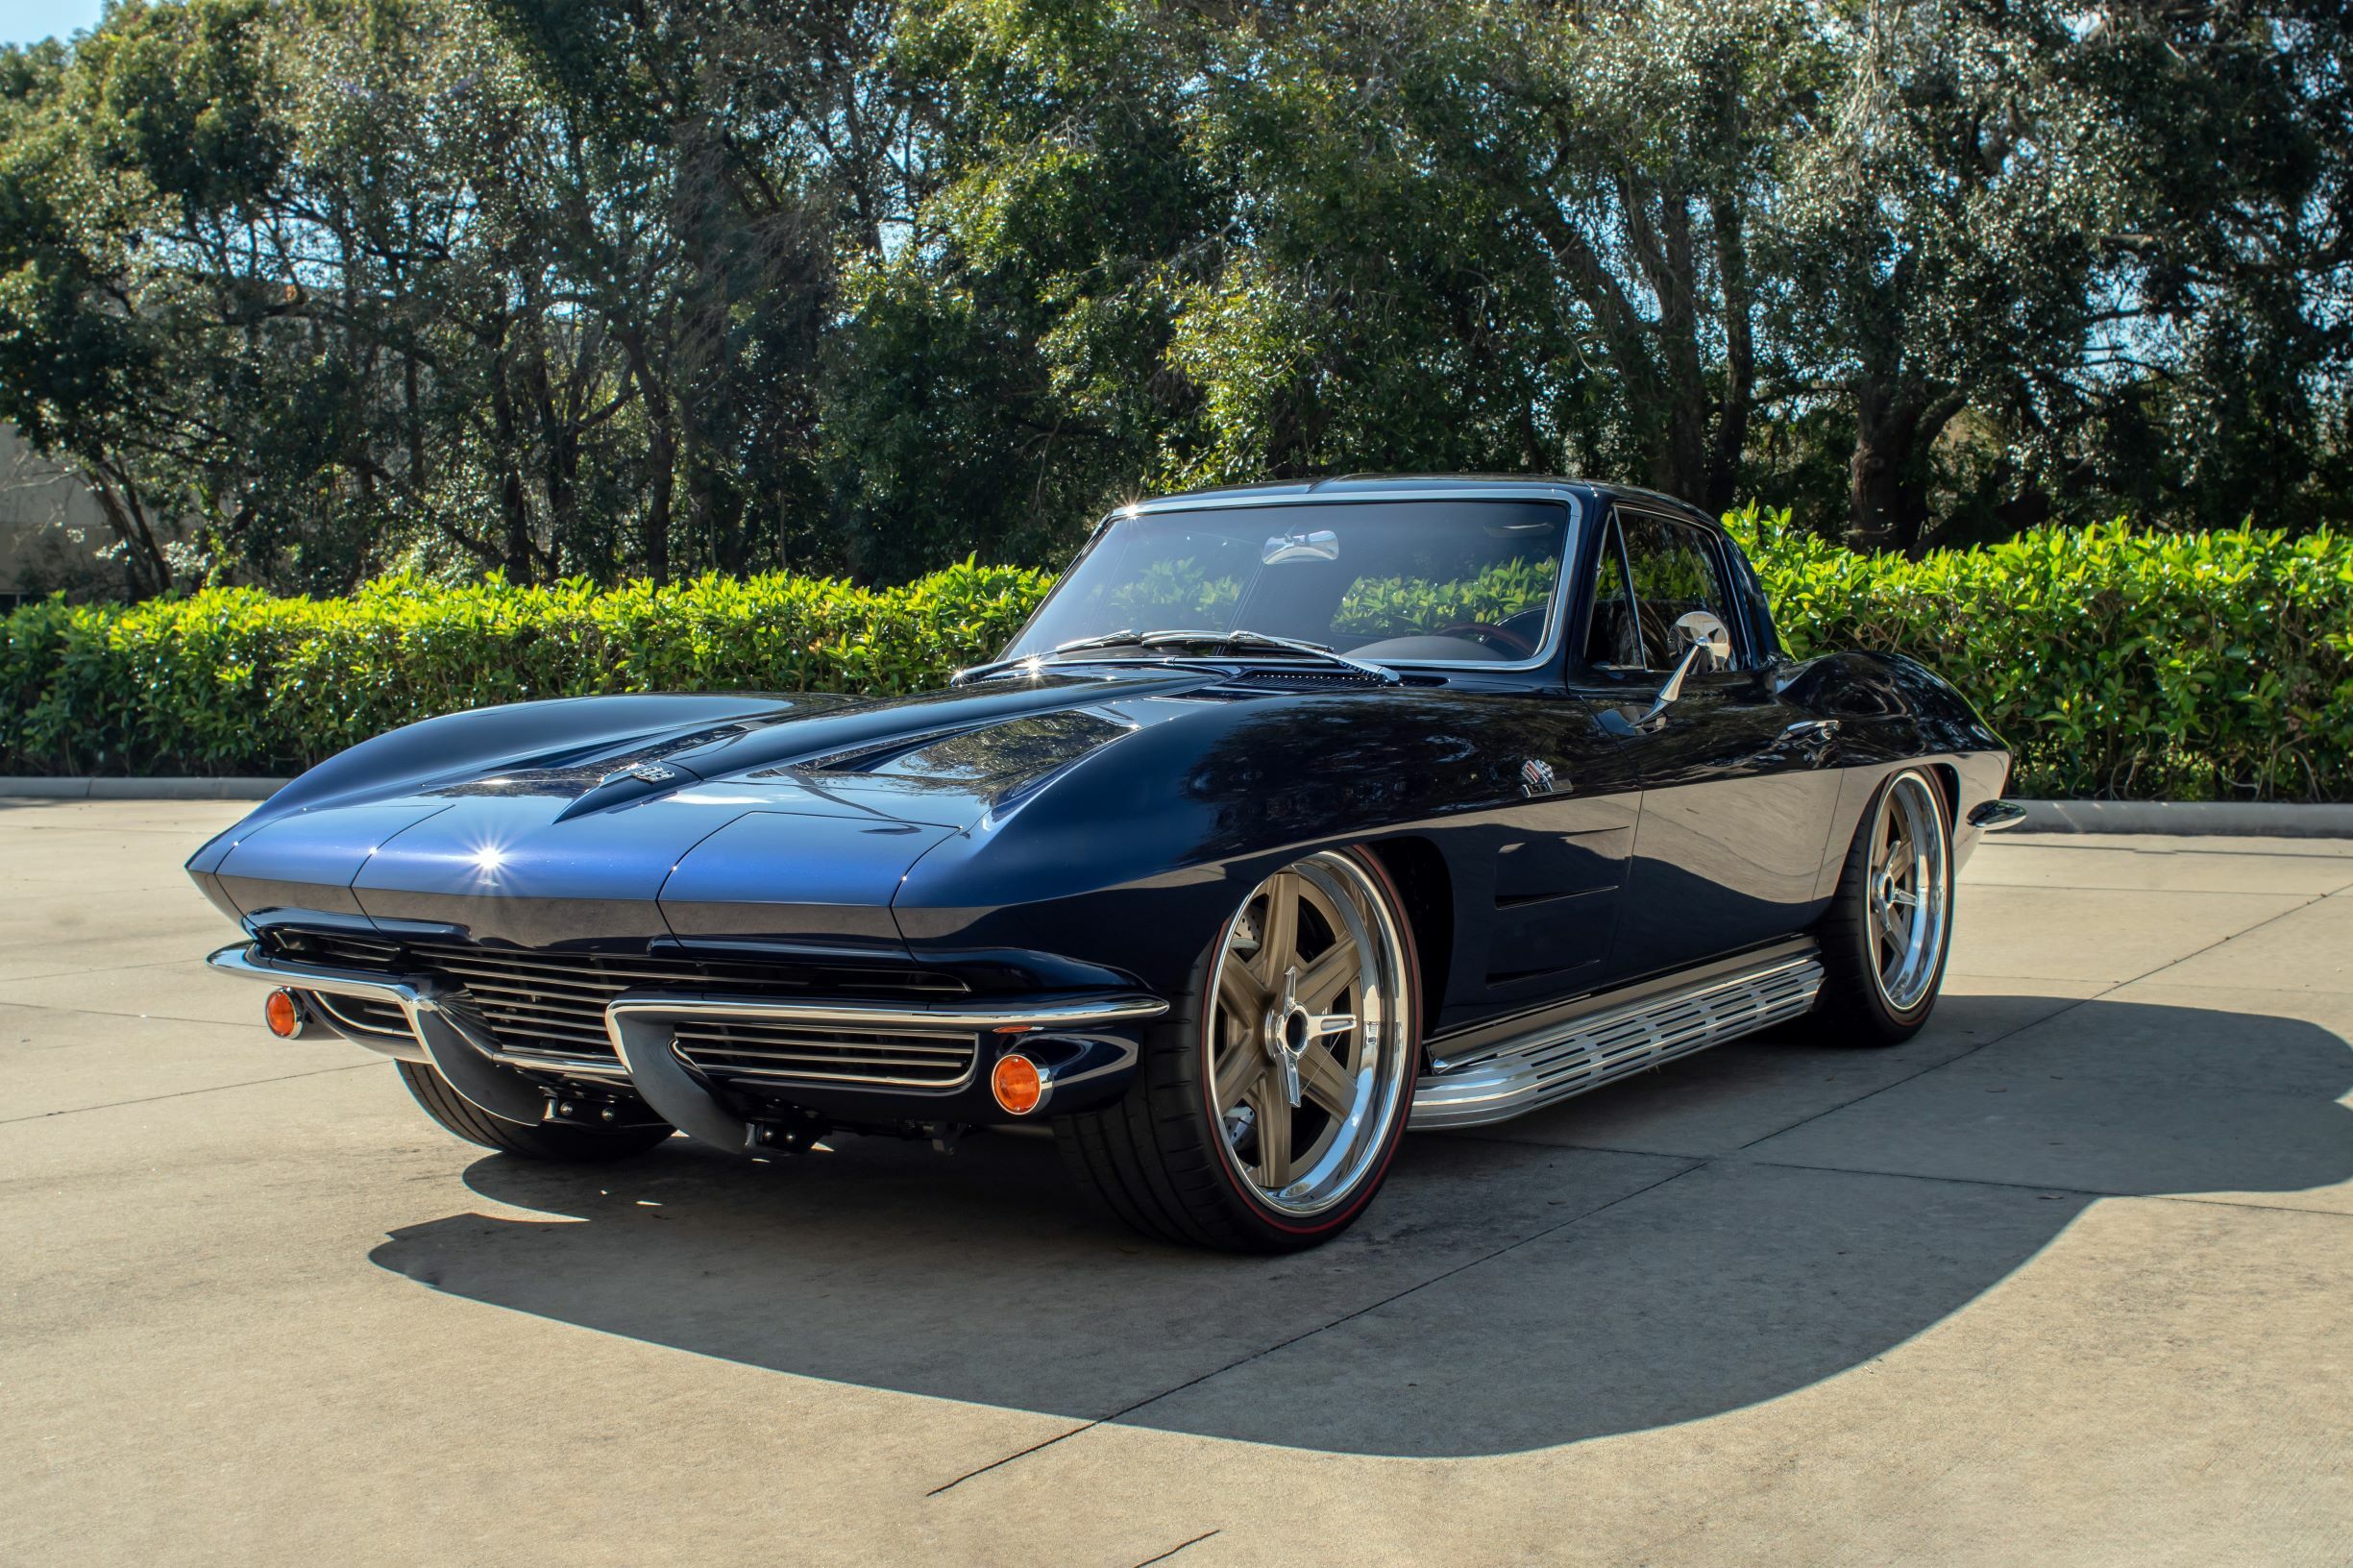 Equipped with a Roadster Shop narrowed Fast Track chassis and powered by a GM Performacne LT1 direct-injected engine, this 1964 Chevrolet Corvette Custom Coupe (Lot #734) produces 460hp and 465 ft/lbs of torque.